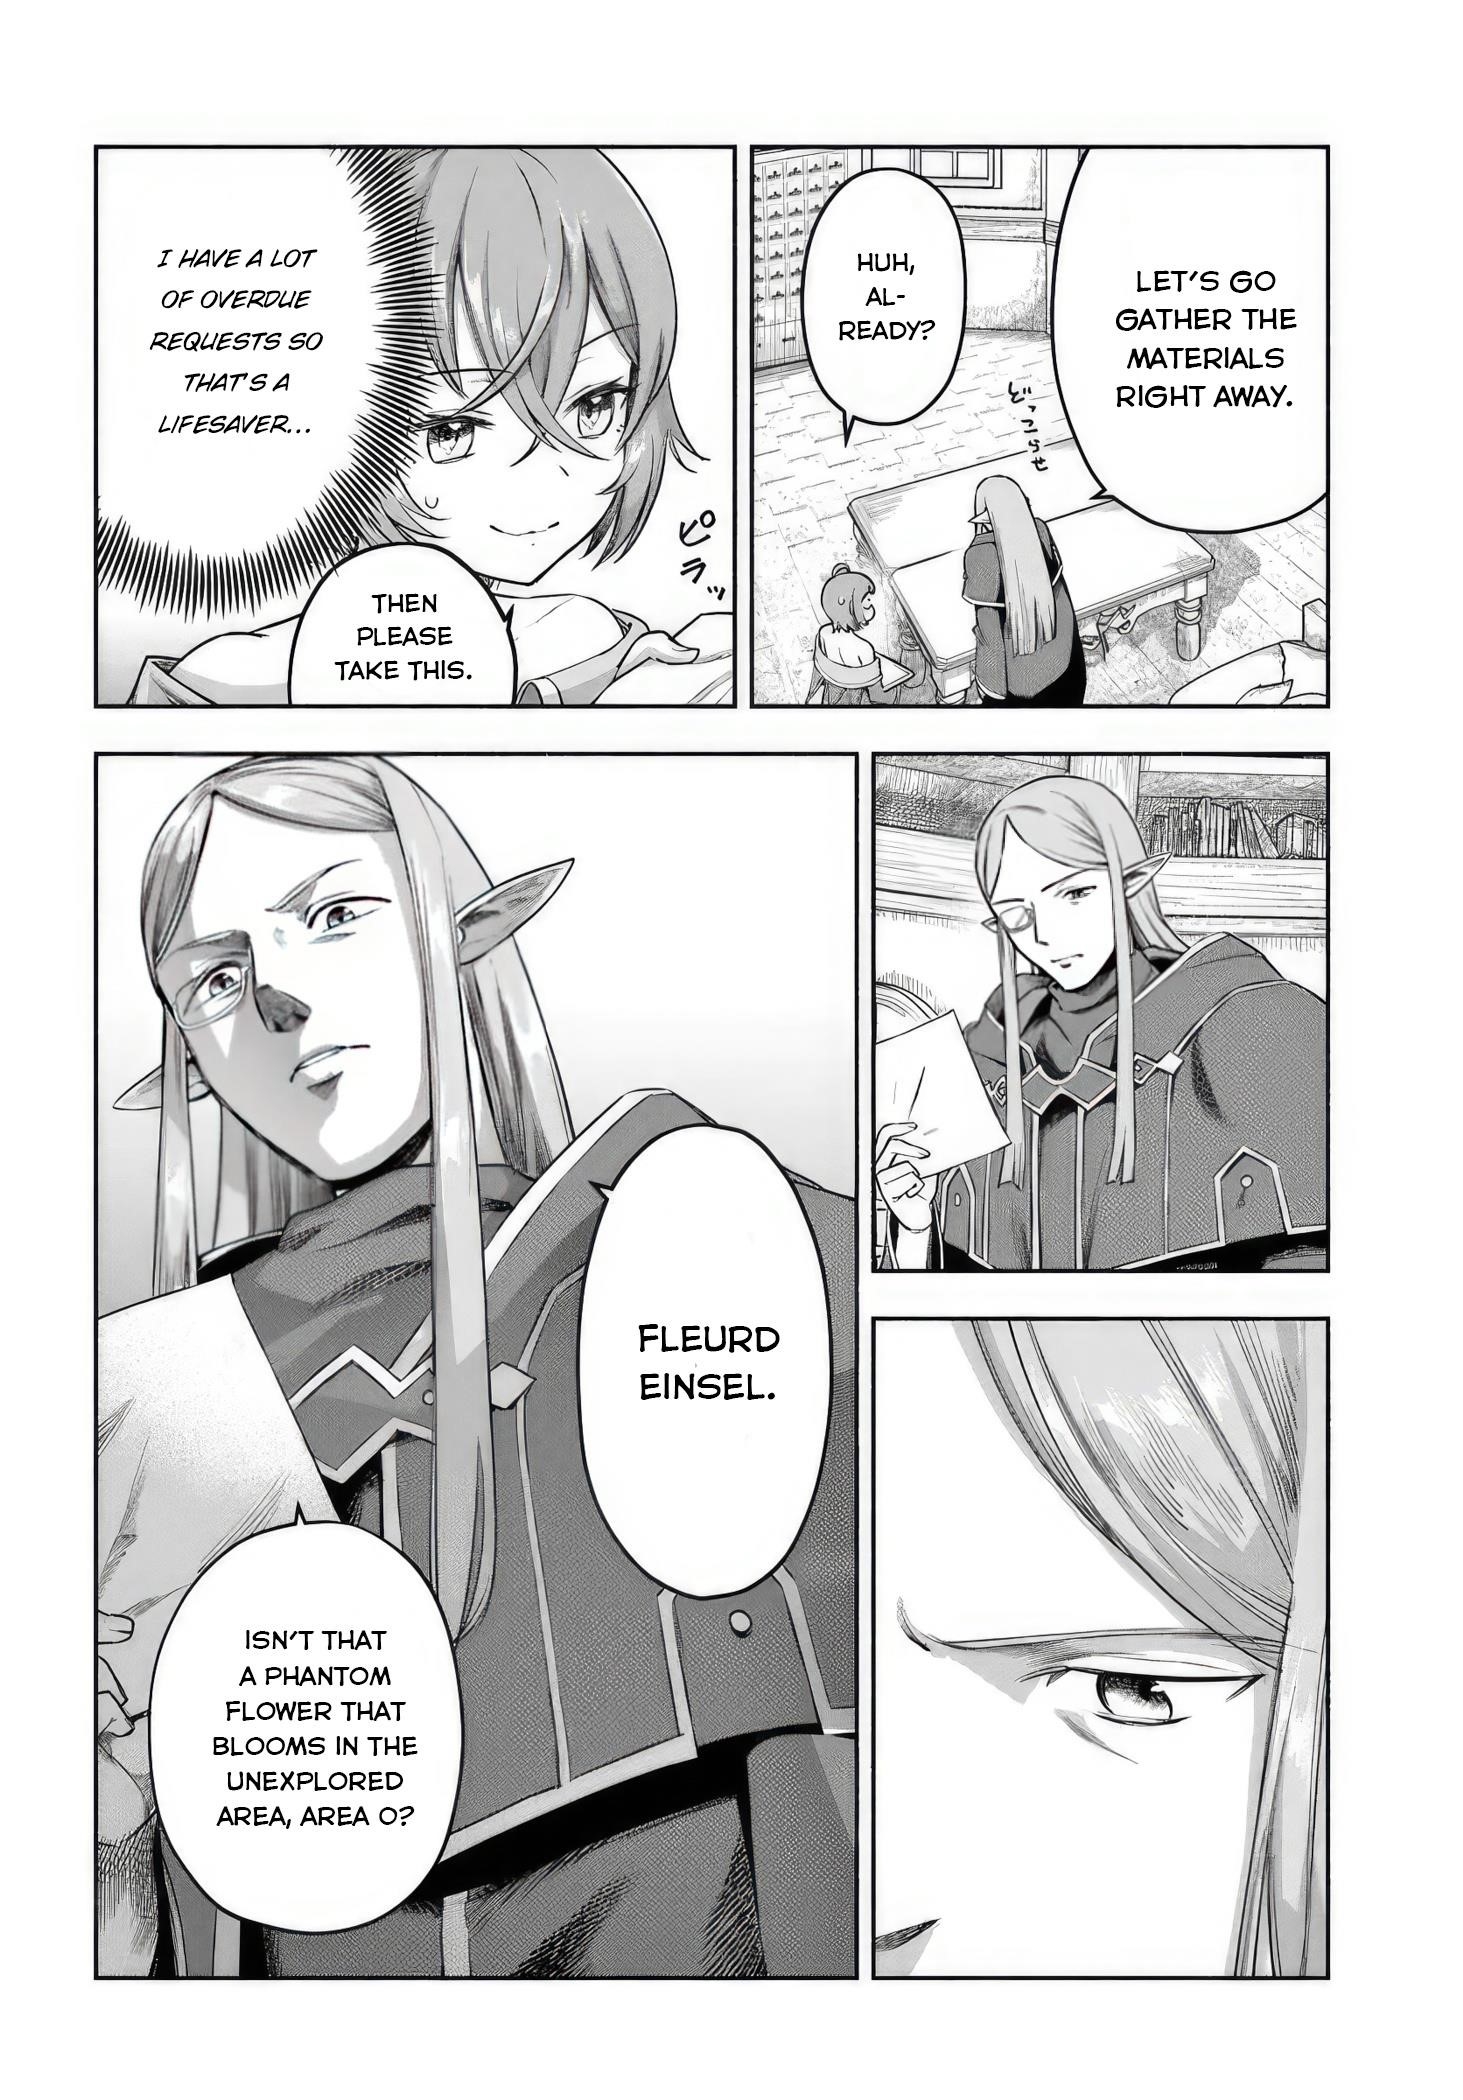 The Assistant Mage Parts Ways With His Power Abusive Alchemist Childhood Friend and His Being Told to Have “Low Chance of Gathering Materials,” and Wants to Start a Slow Life at a Town in the Remote Region Chapter 10 - Page 16